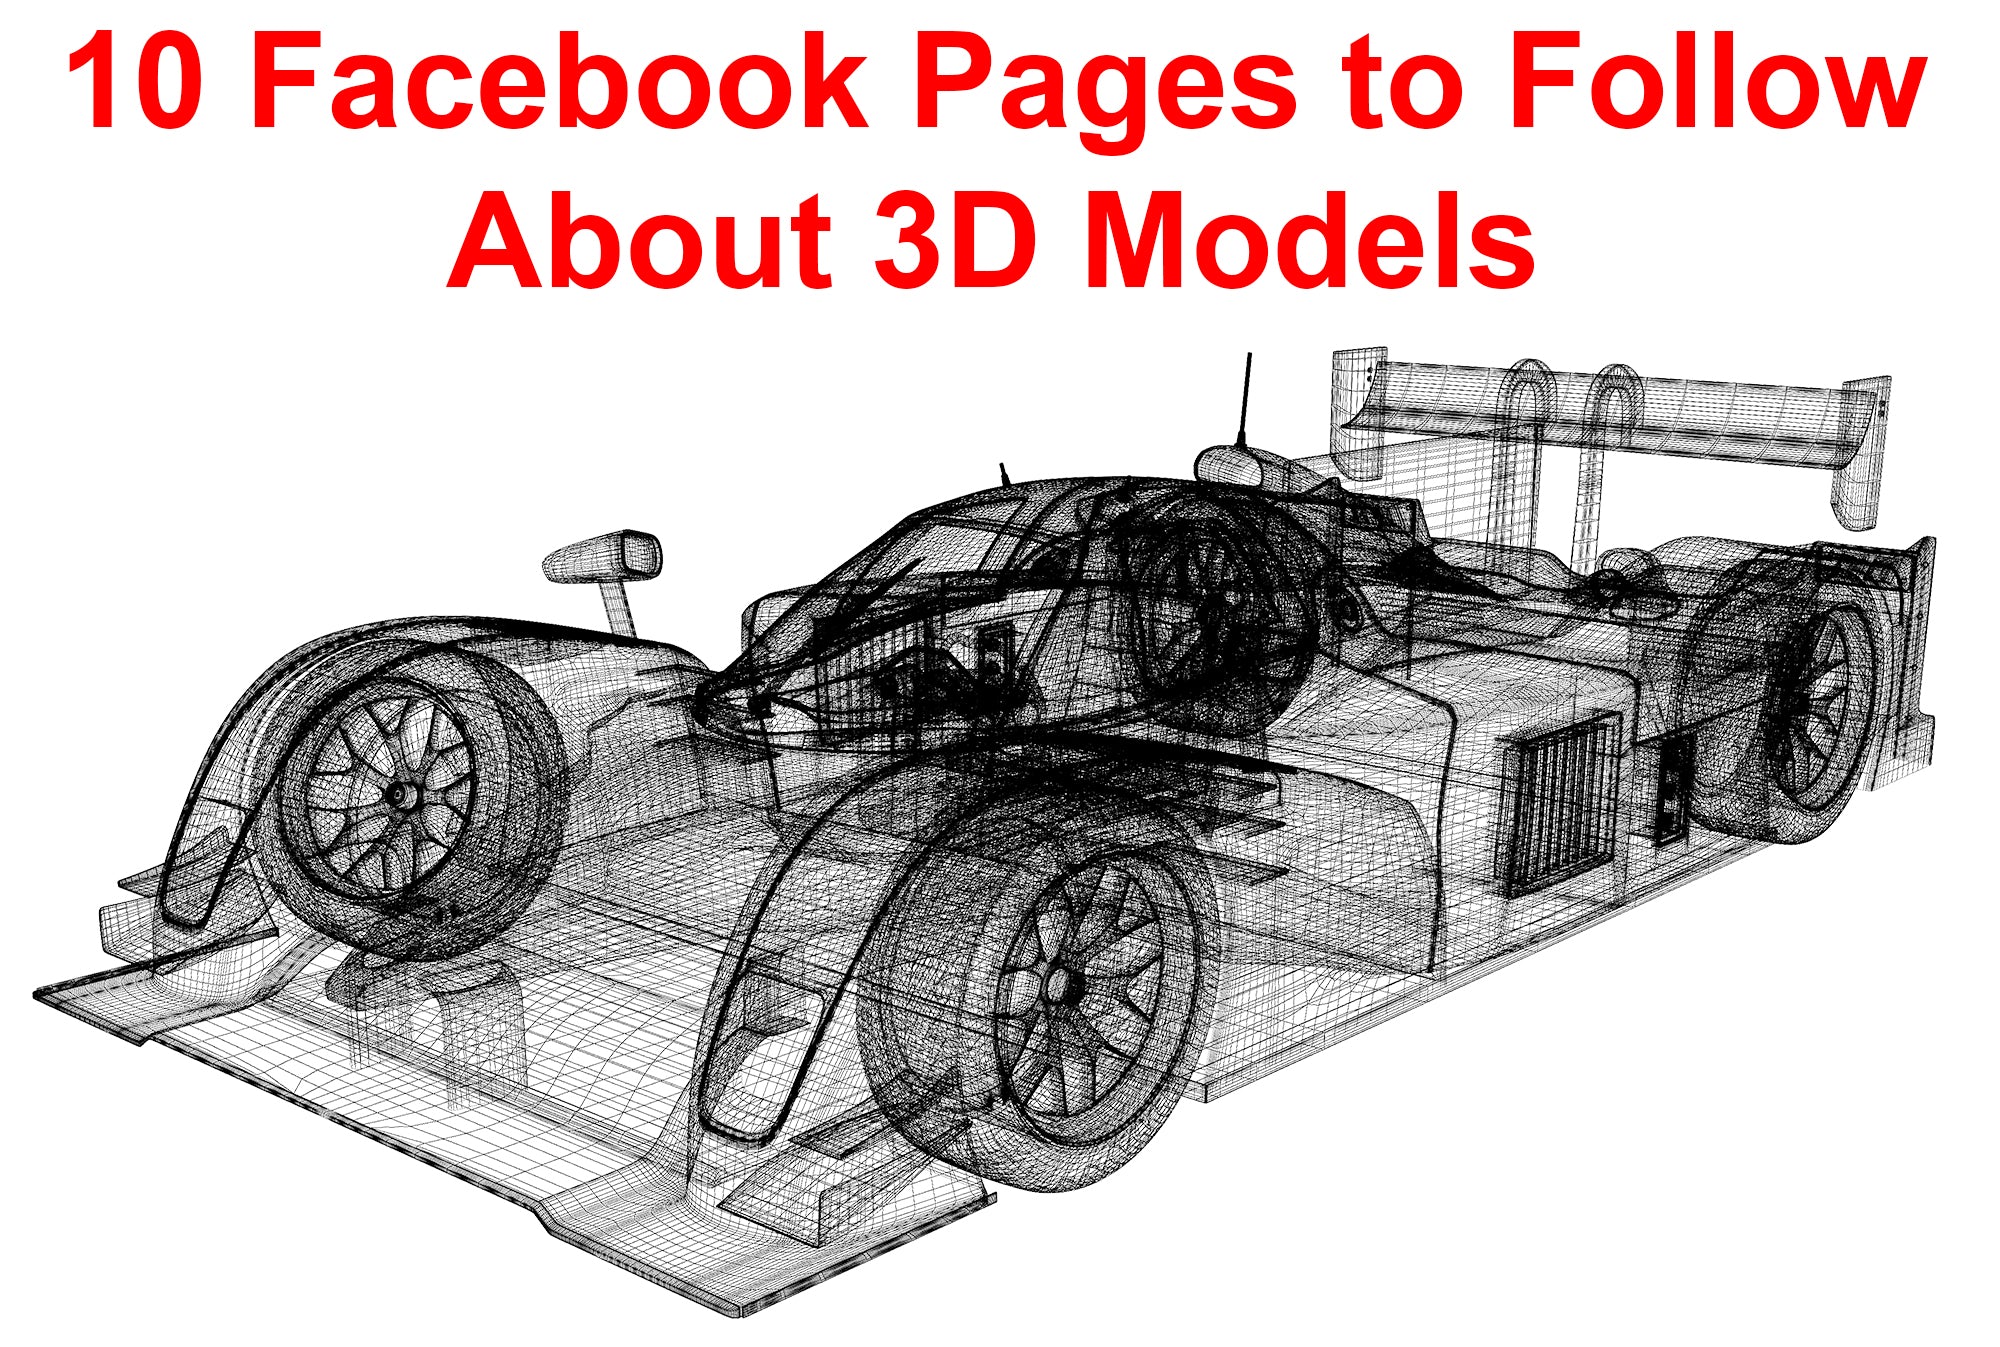 10 Facebook Pages to Follow About 3D Models